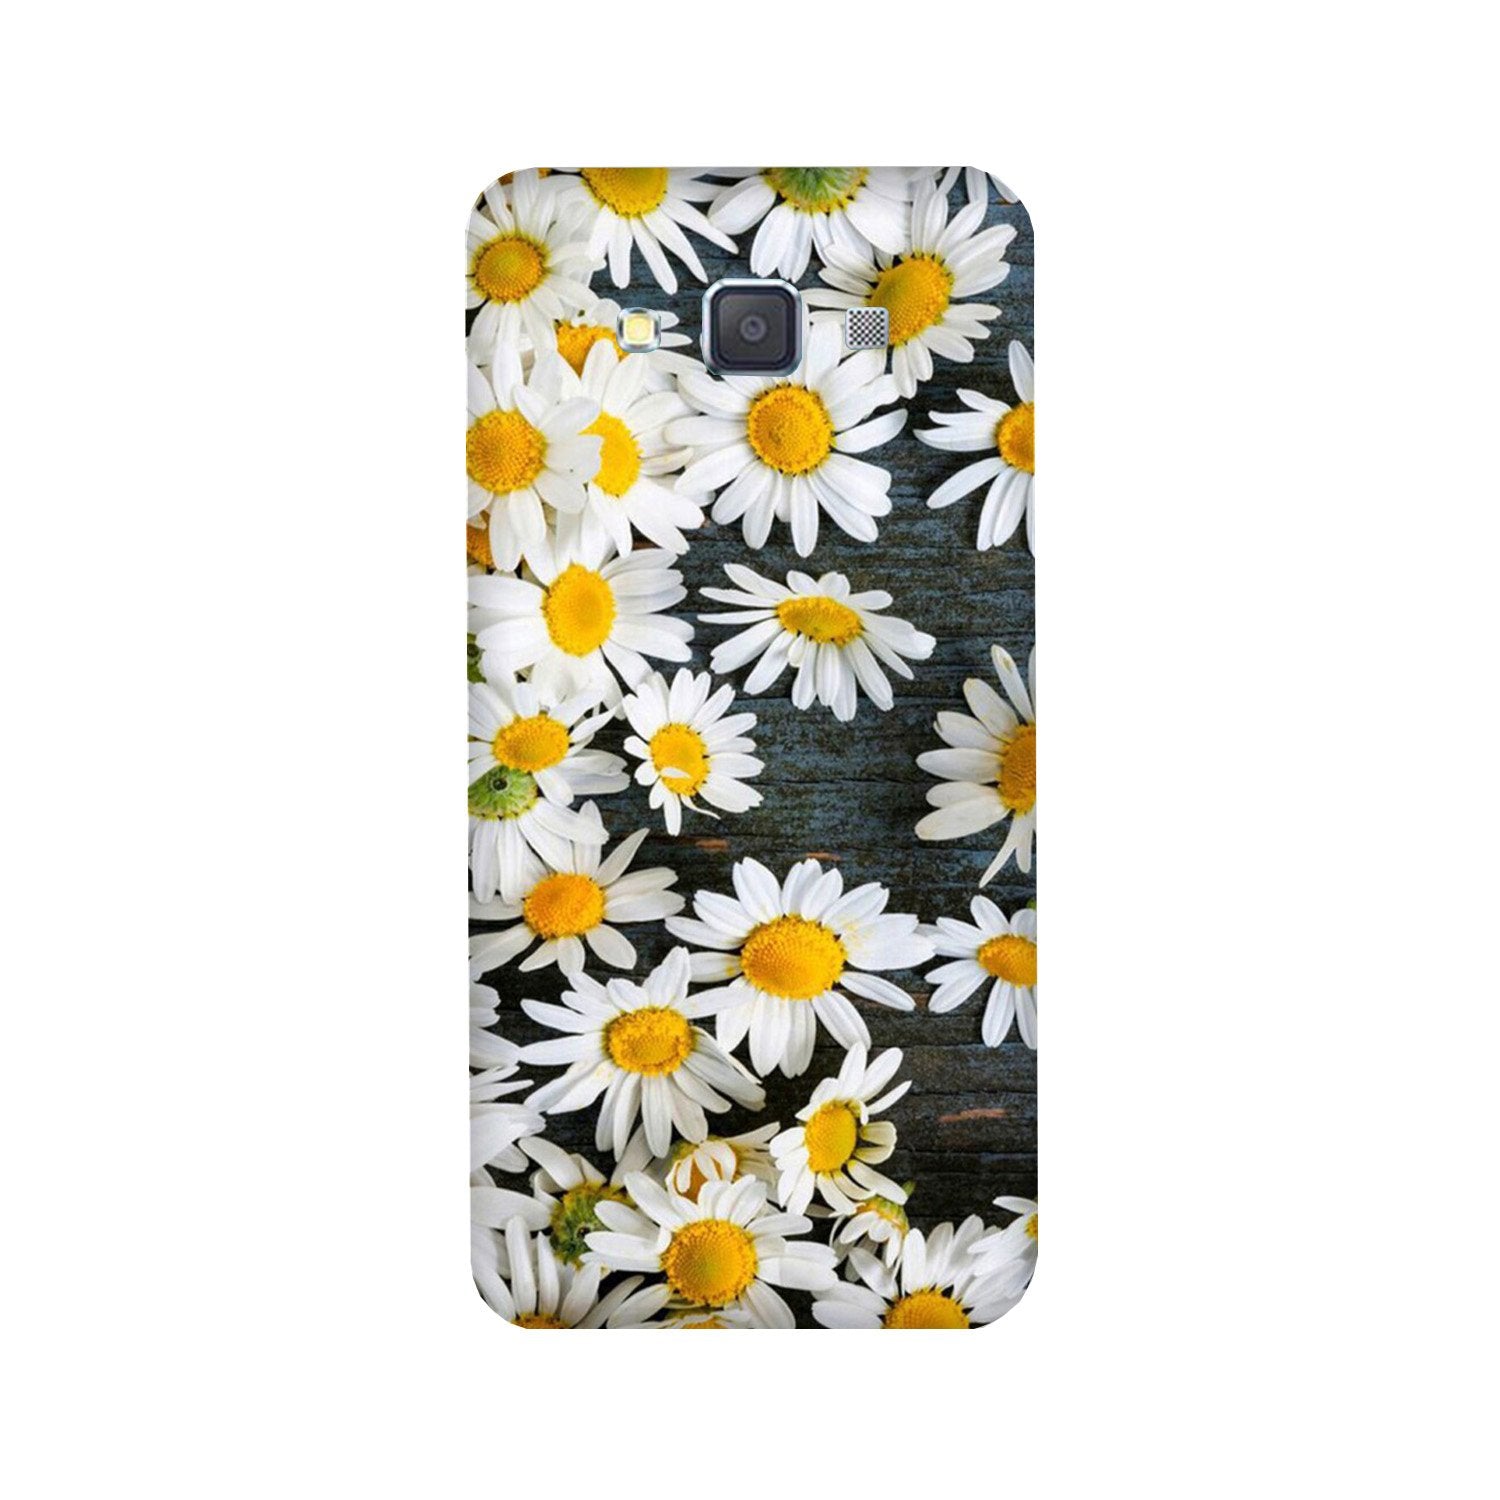 White flowers2 Case for Galaxy ON7/ON7 Pro